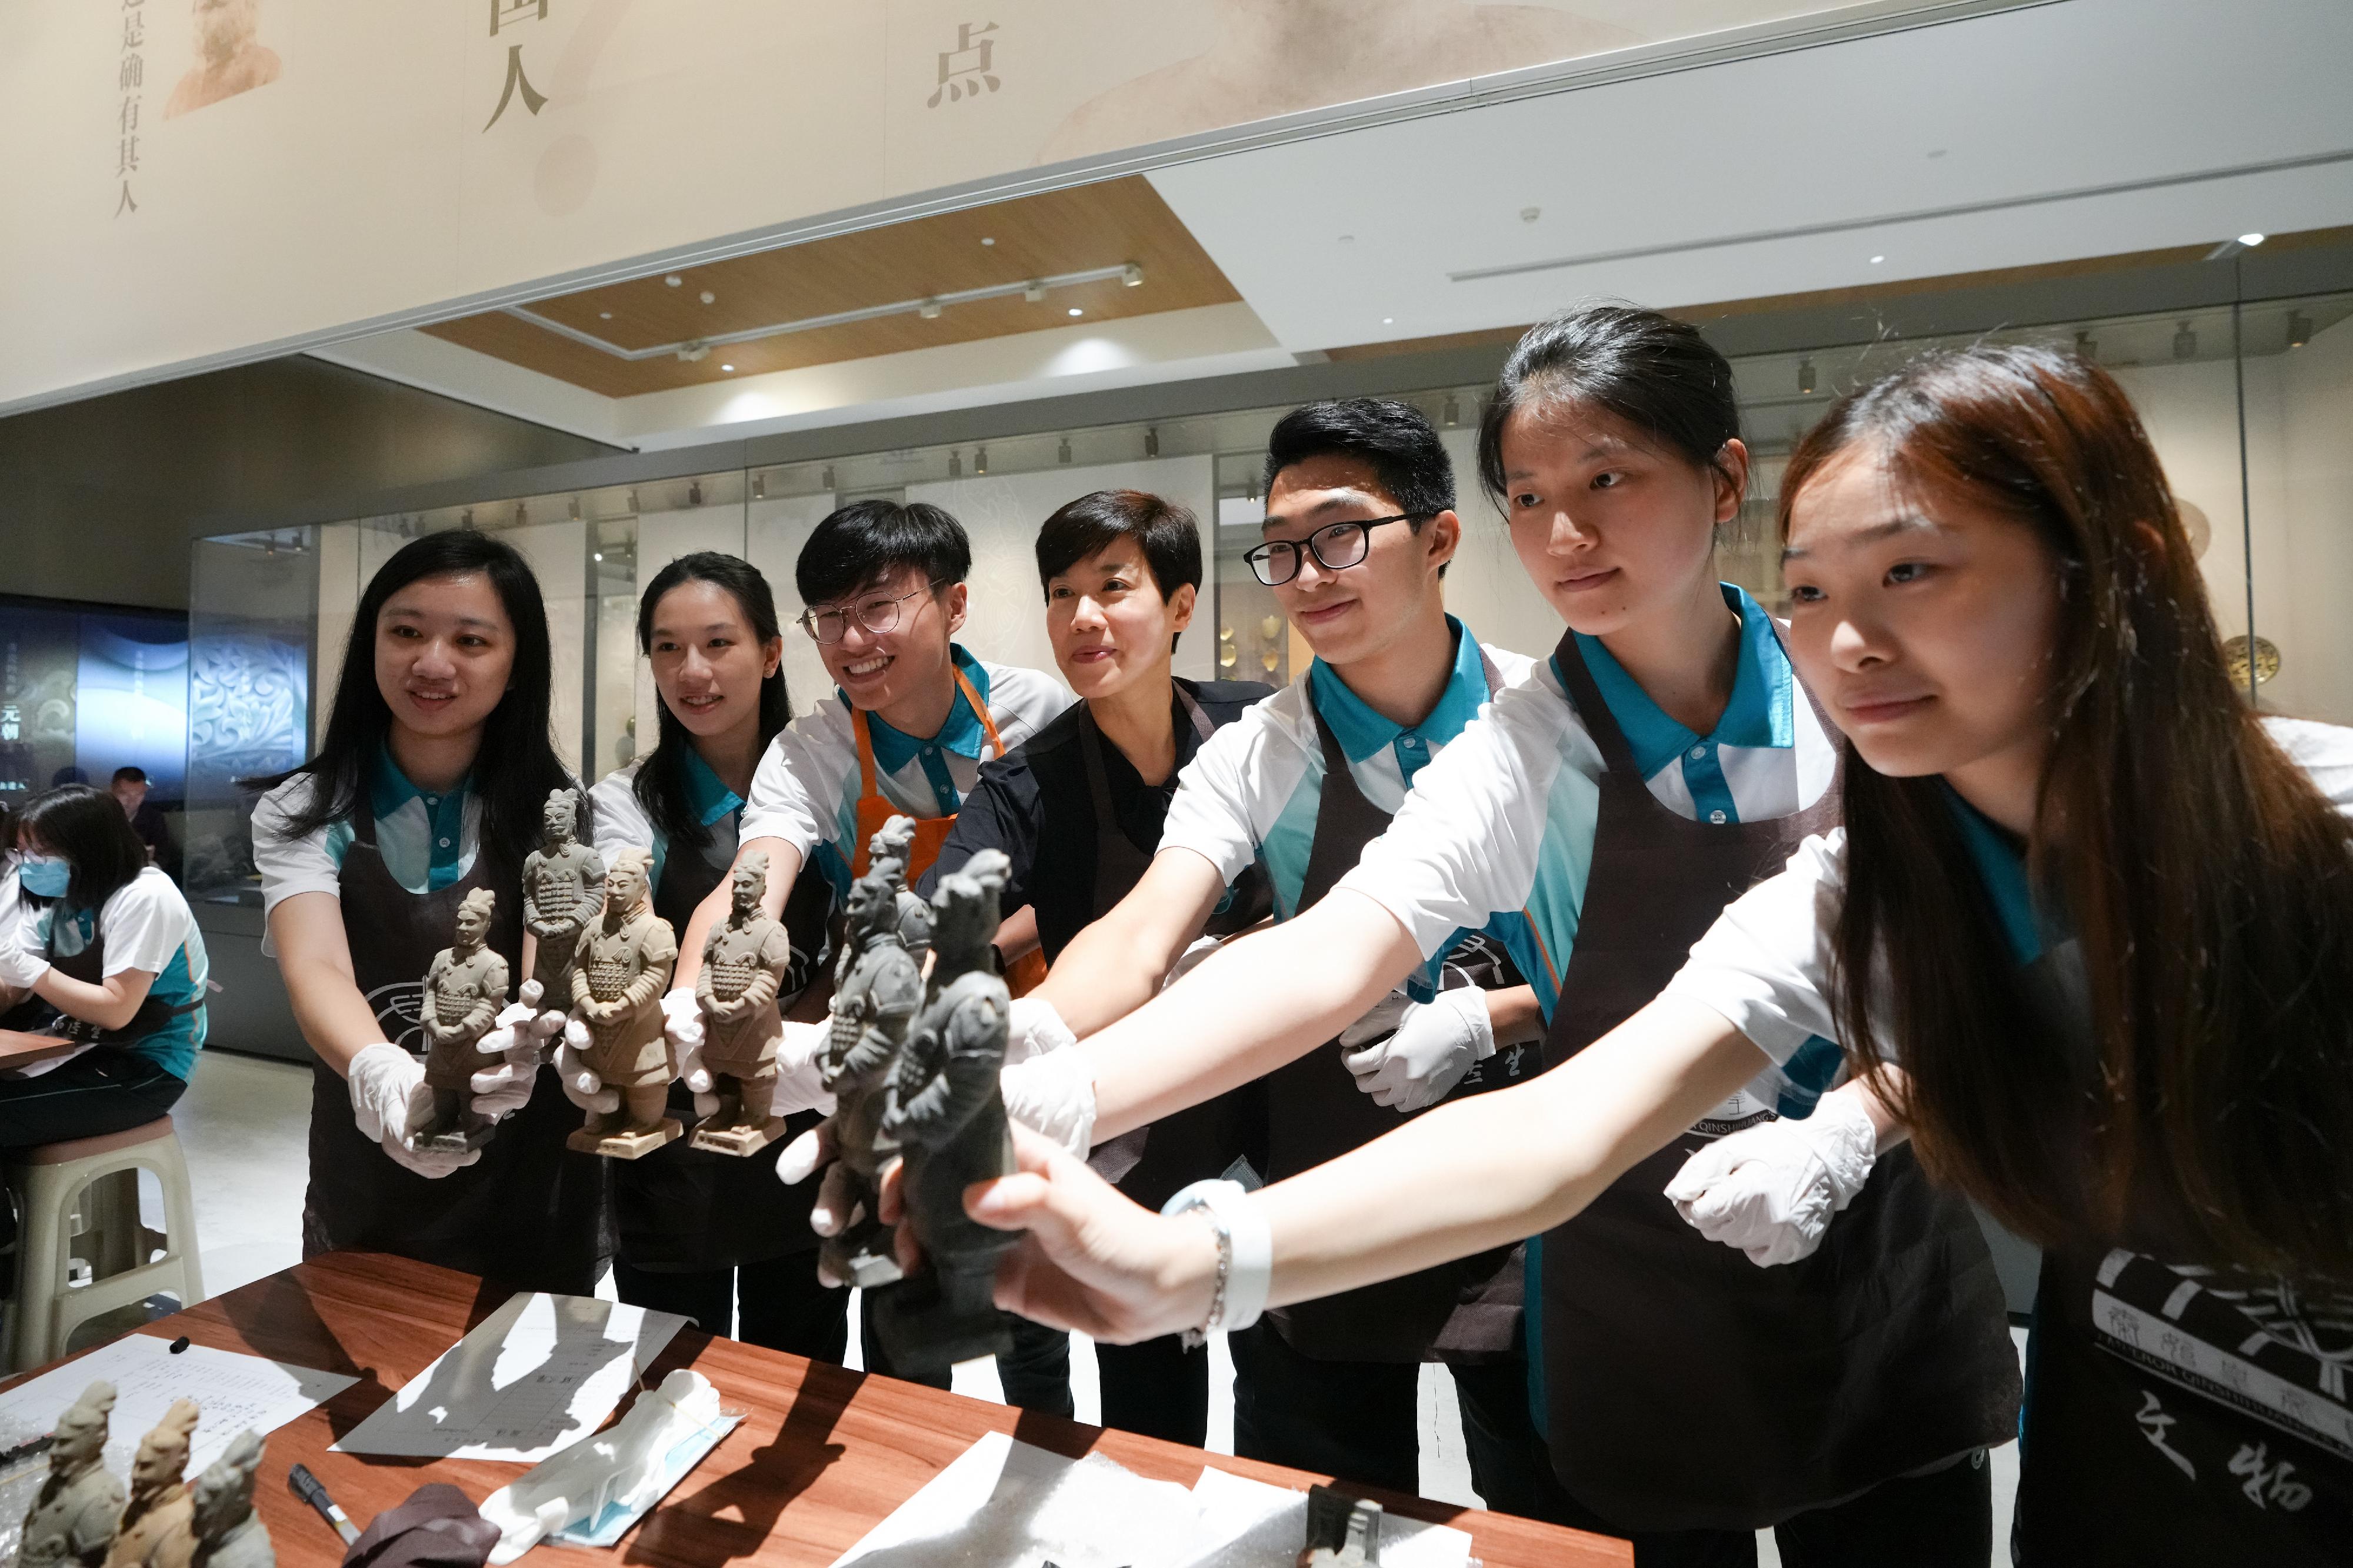 The Commissioner of Customs and Excise, Ms Louise Ho (centre), and members of “Customs YES” participated in a workshop on the restoration of Qin terracotta figures on July 10.
